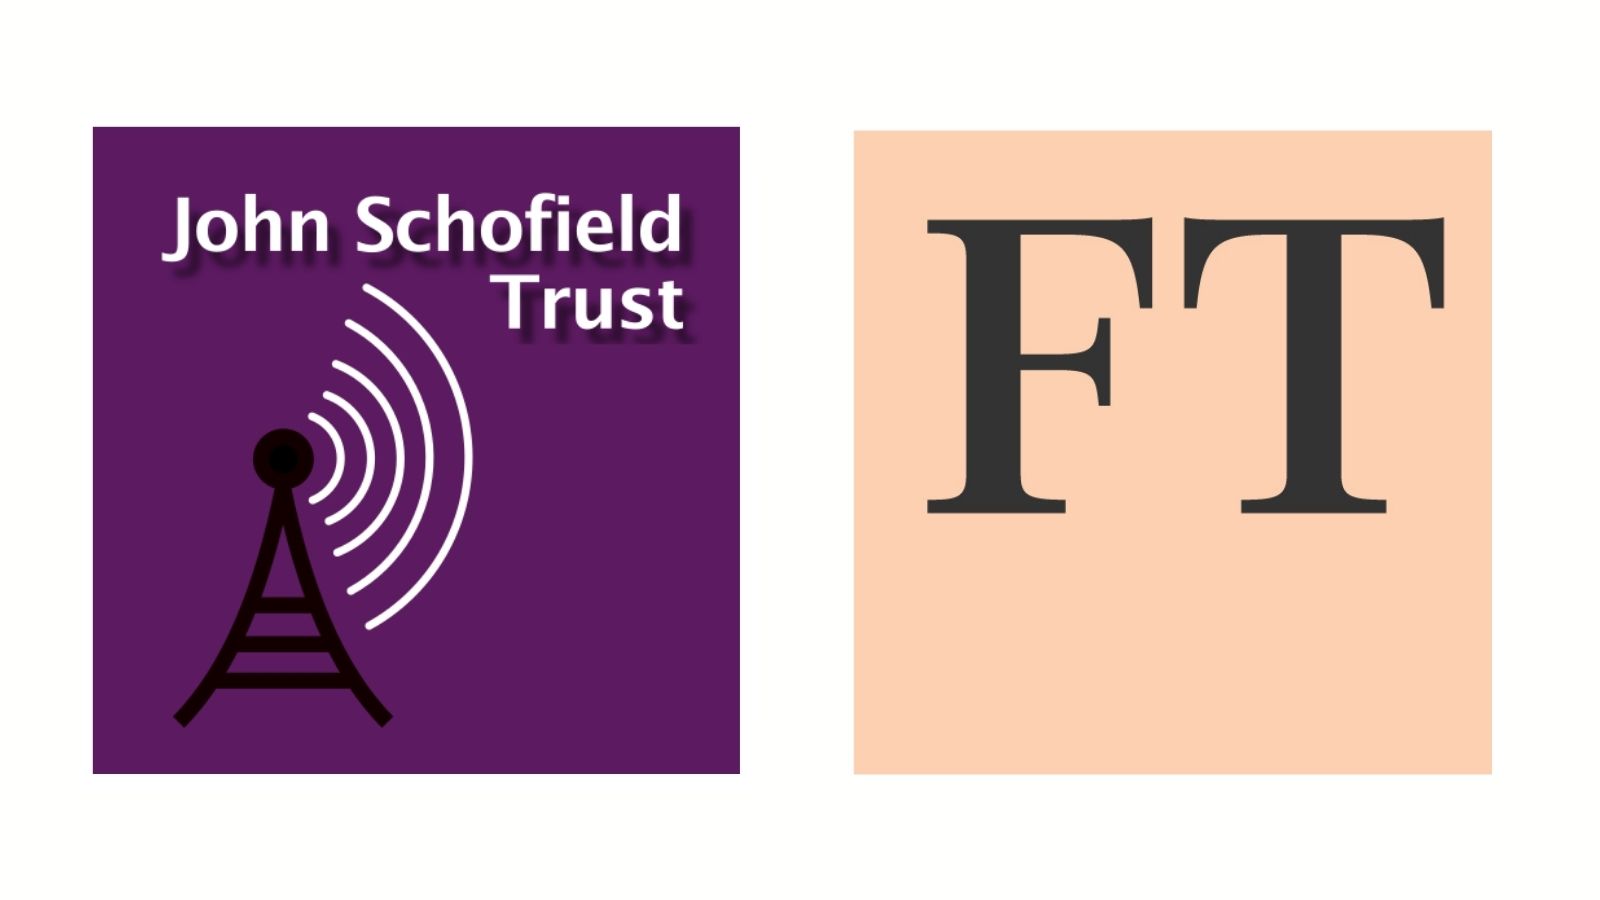 John Schofield Trust partners with Financial Times